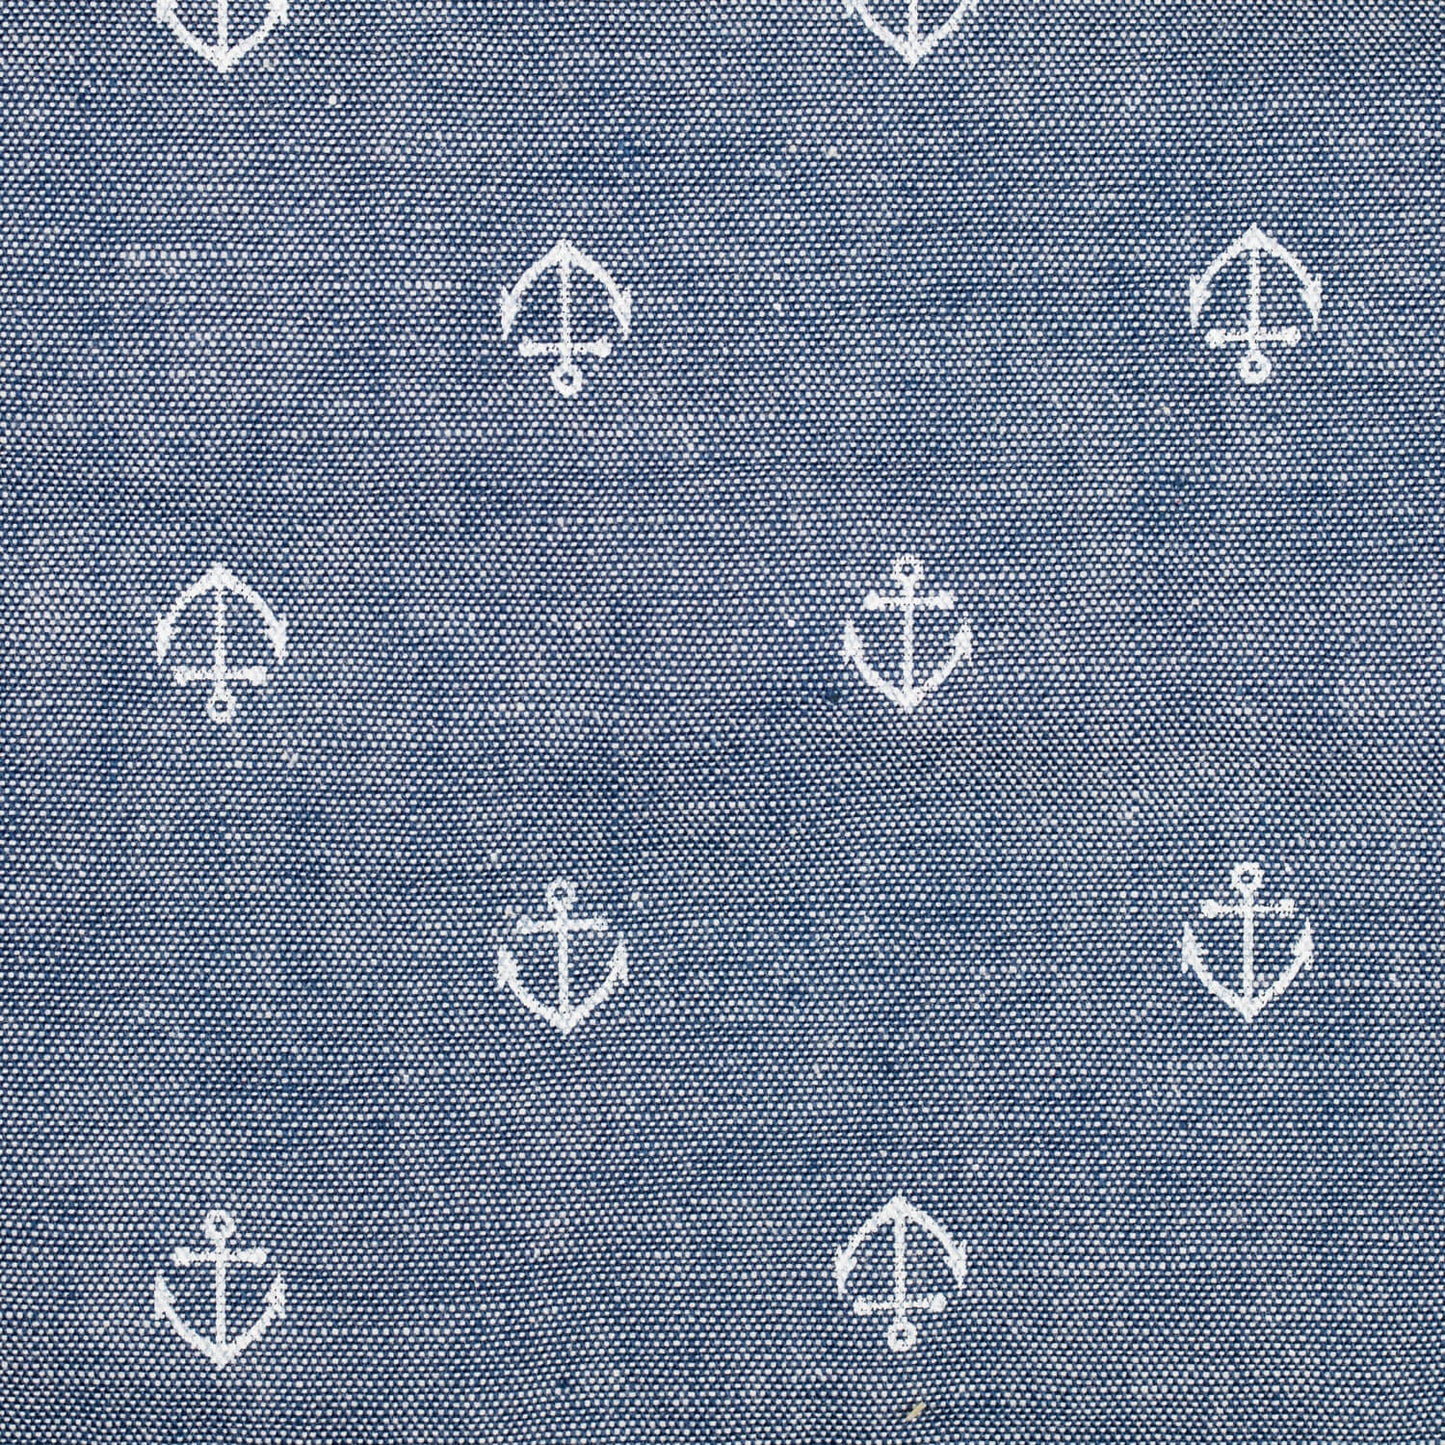 White anchor pattern on blue cloth